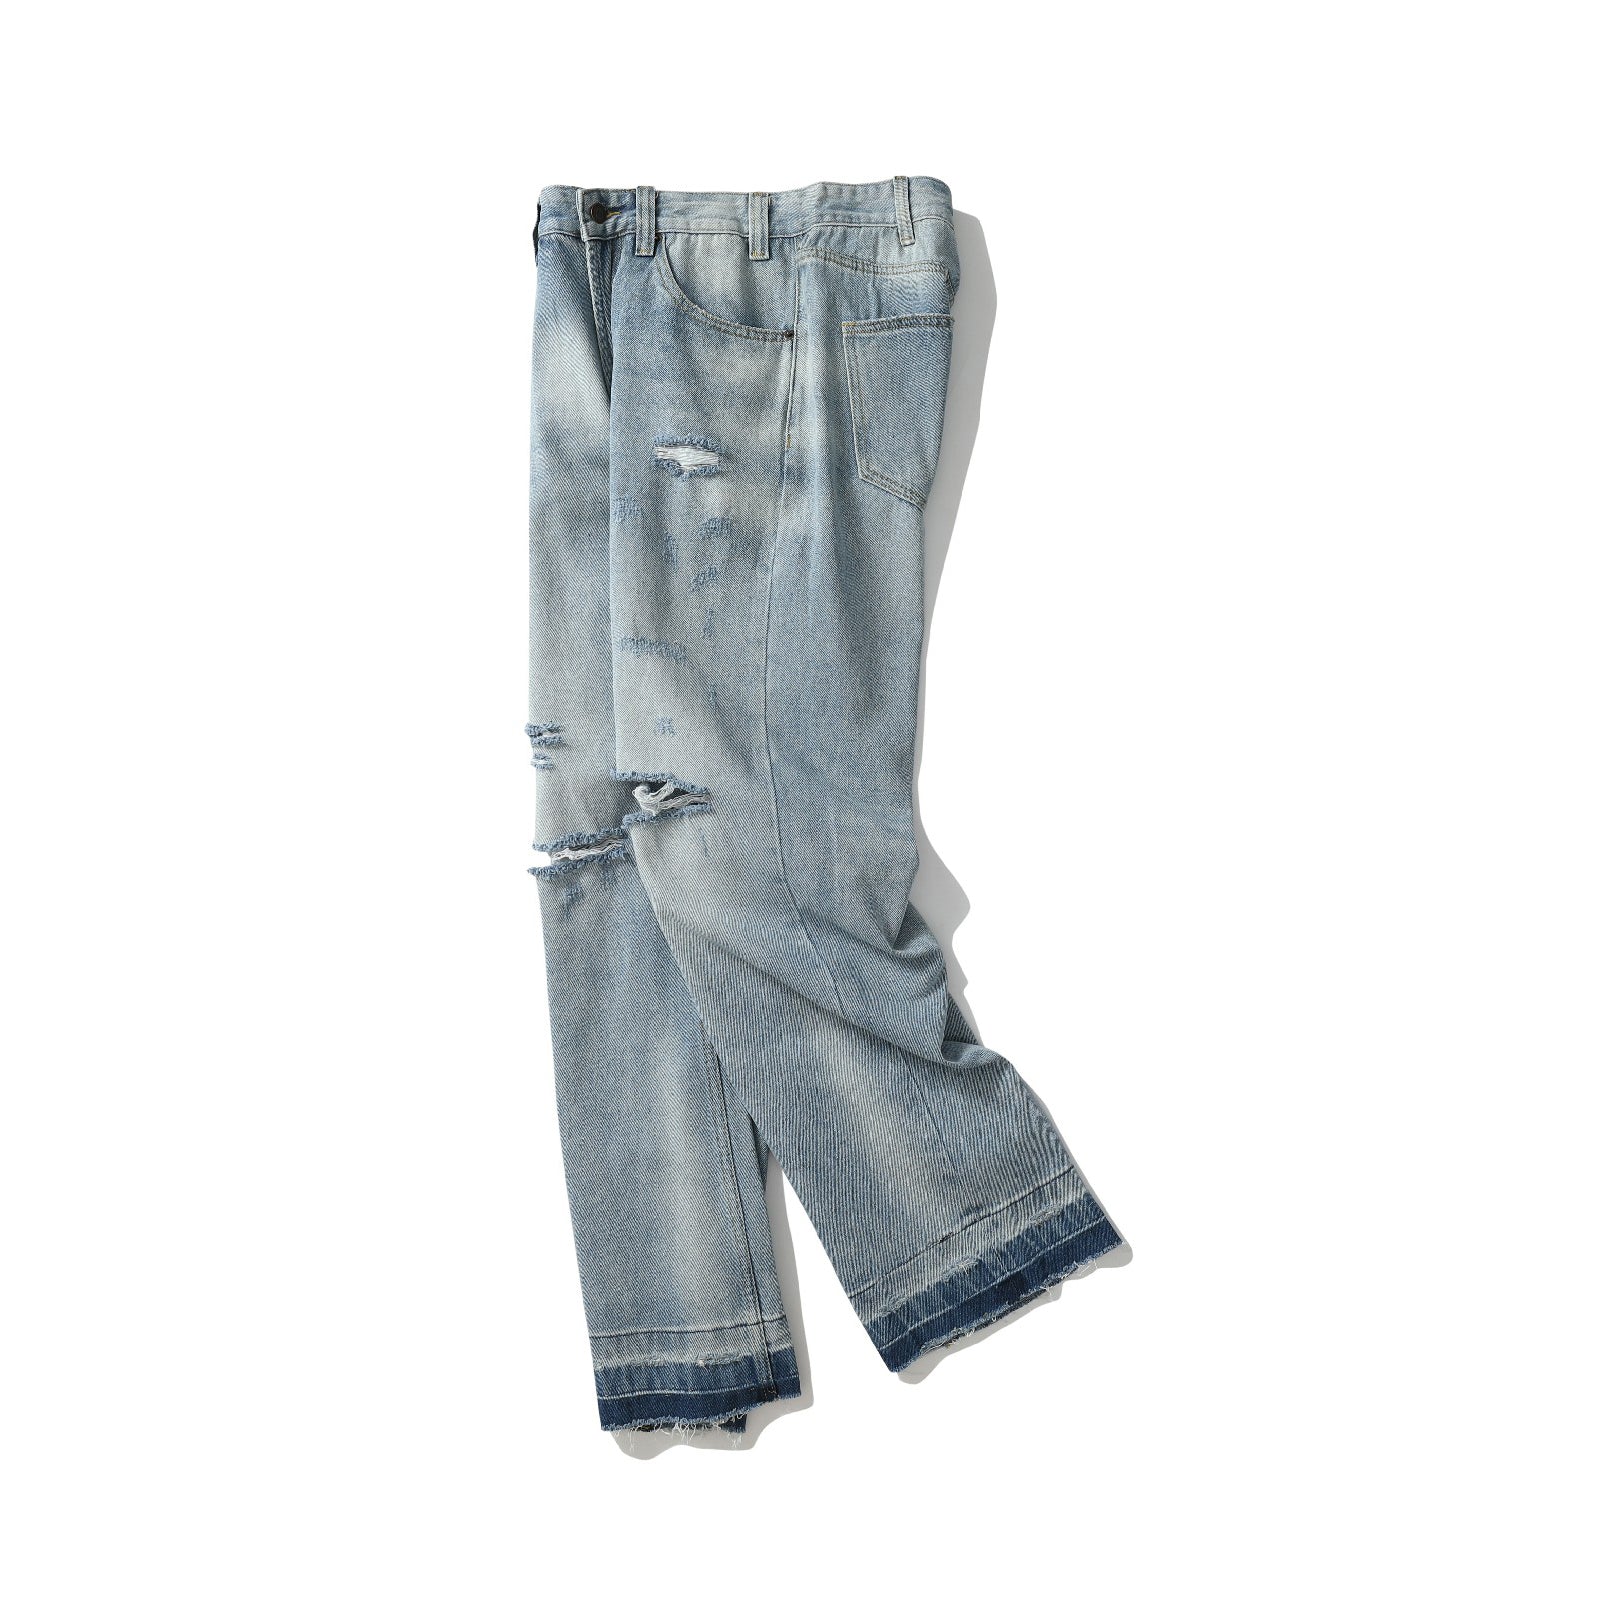 'Street Style Ripped' Jeans - Santo 